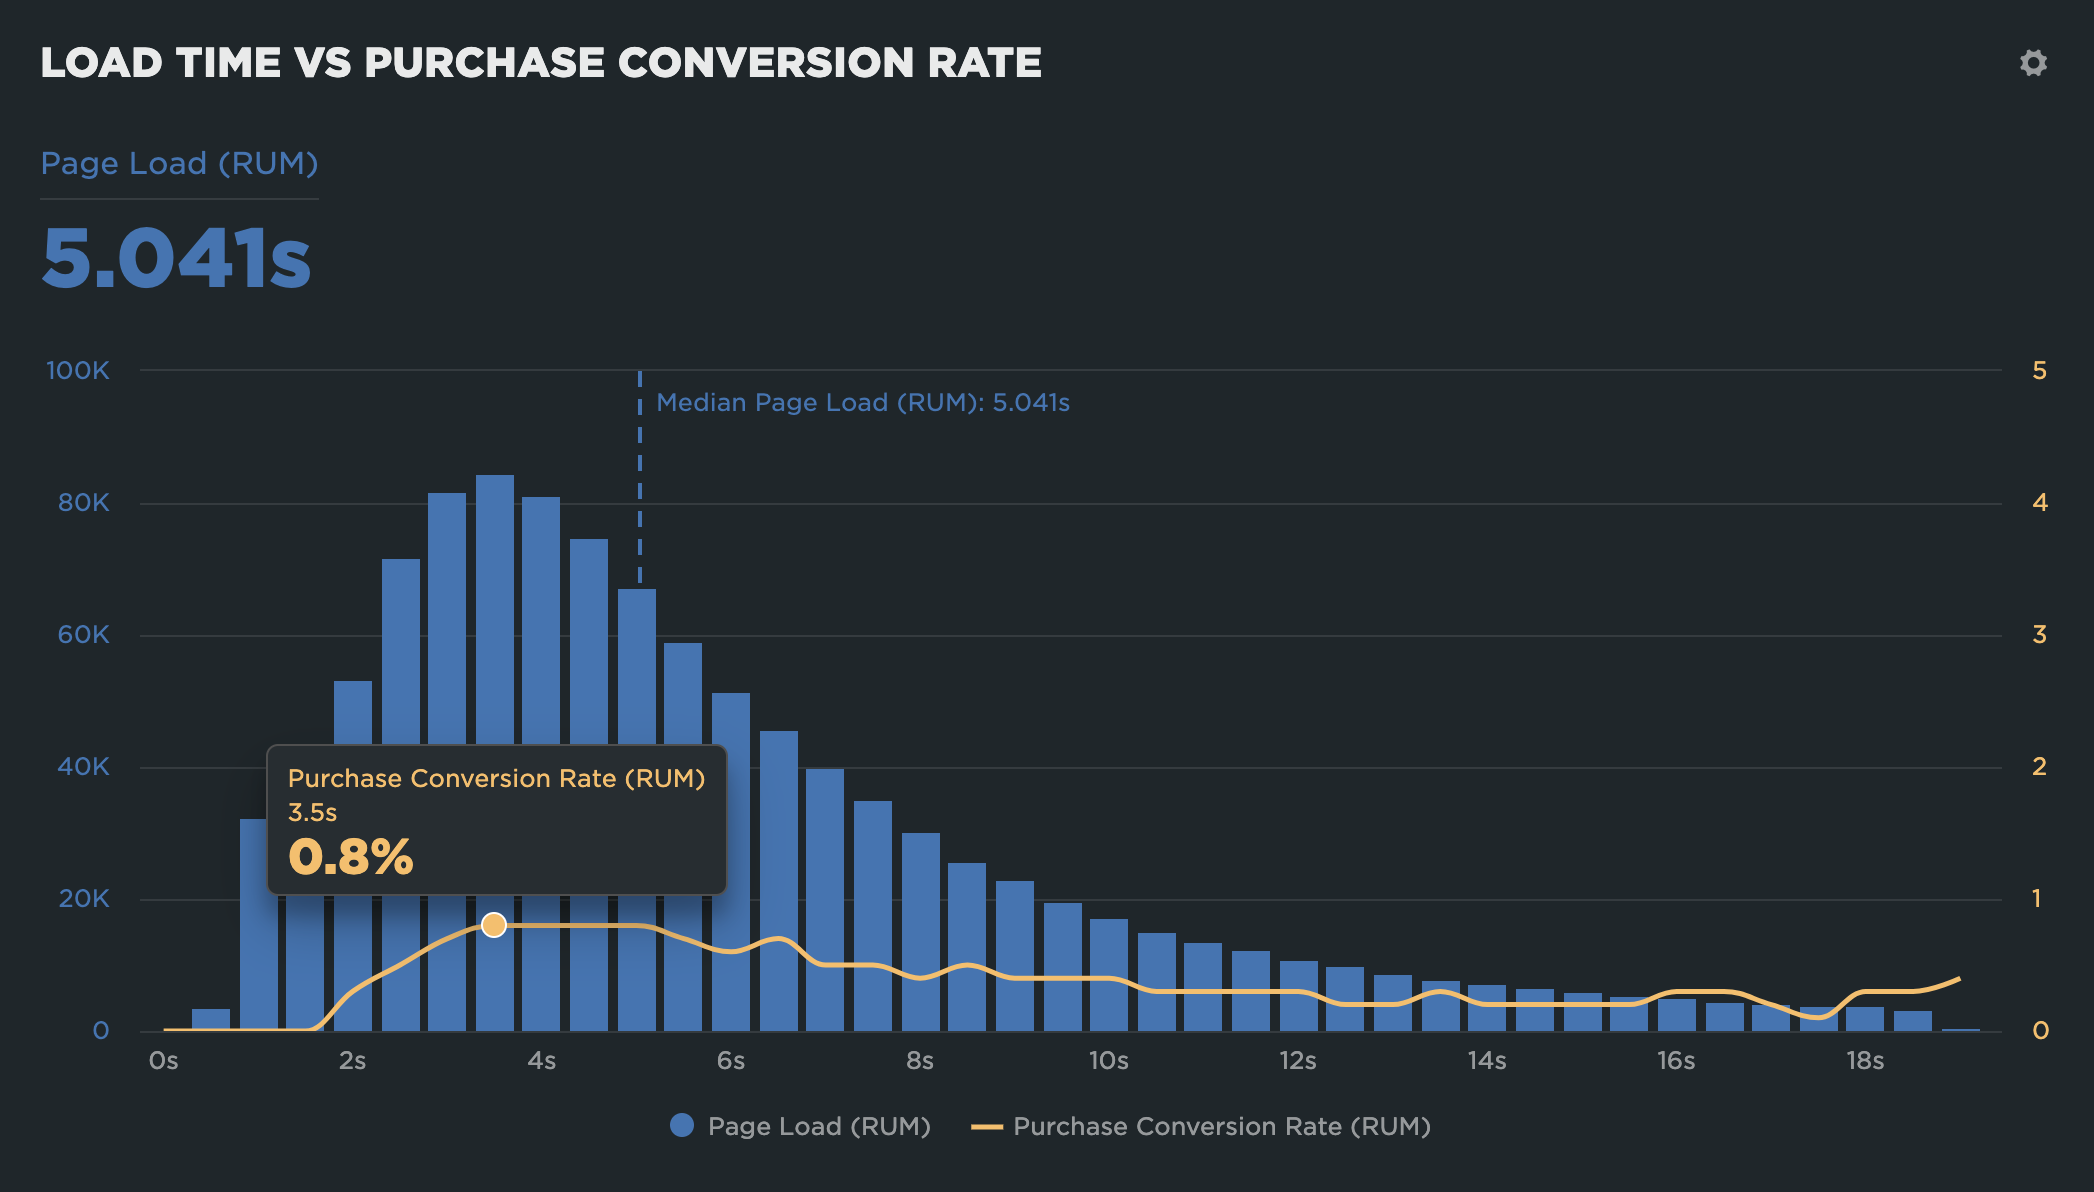 Page load correlated with conversion rate illustrates the impact of performance on your bottom line.